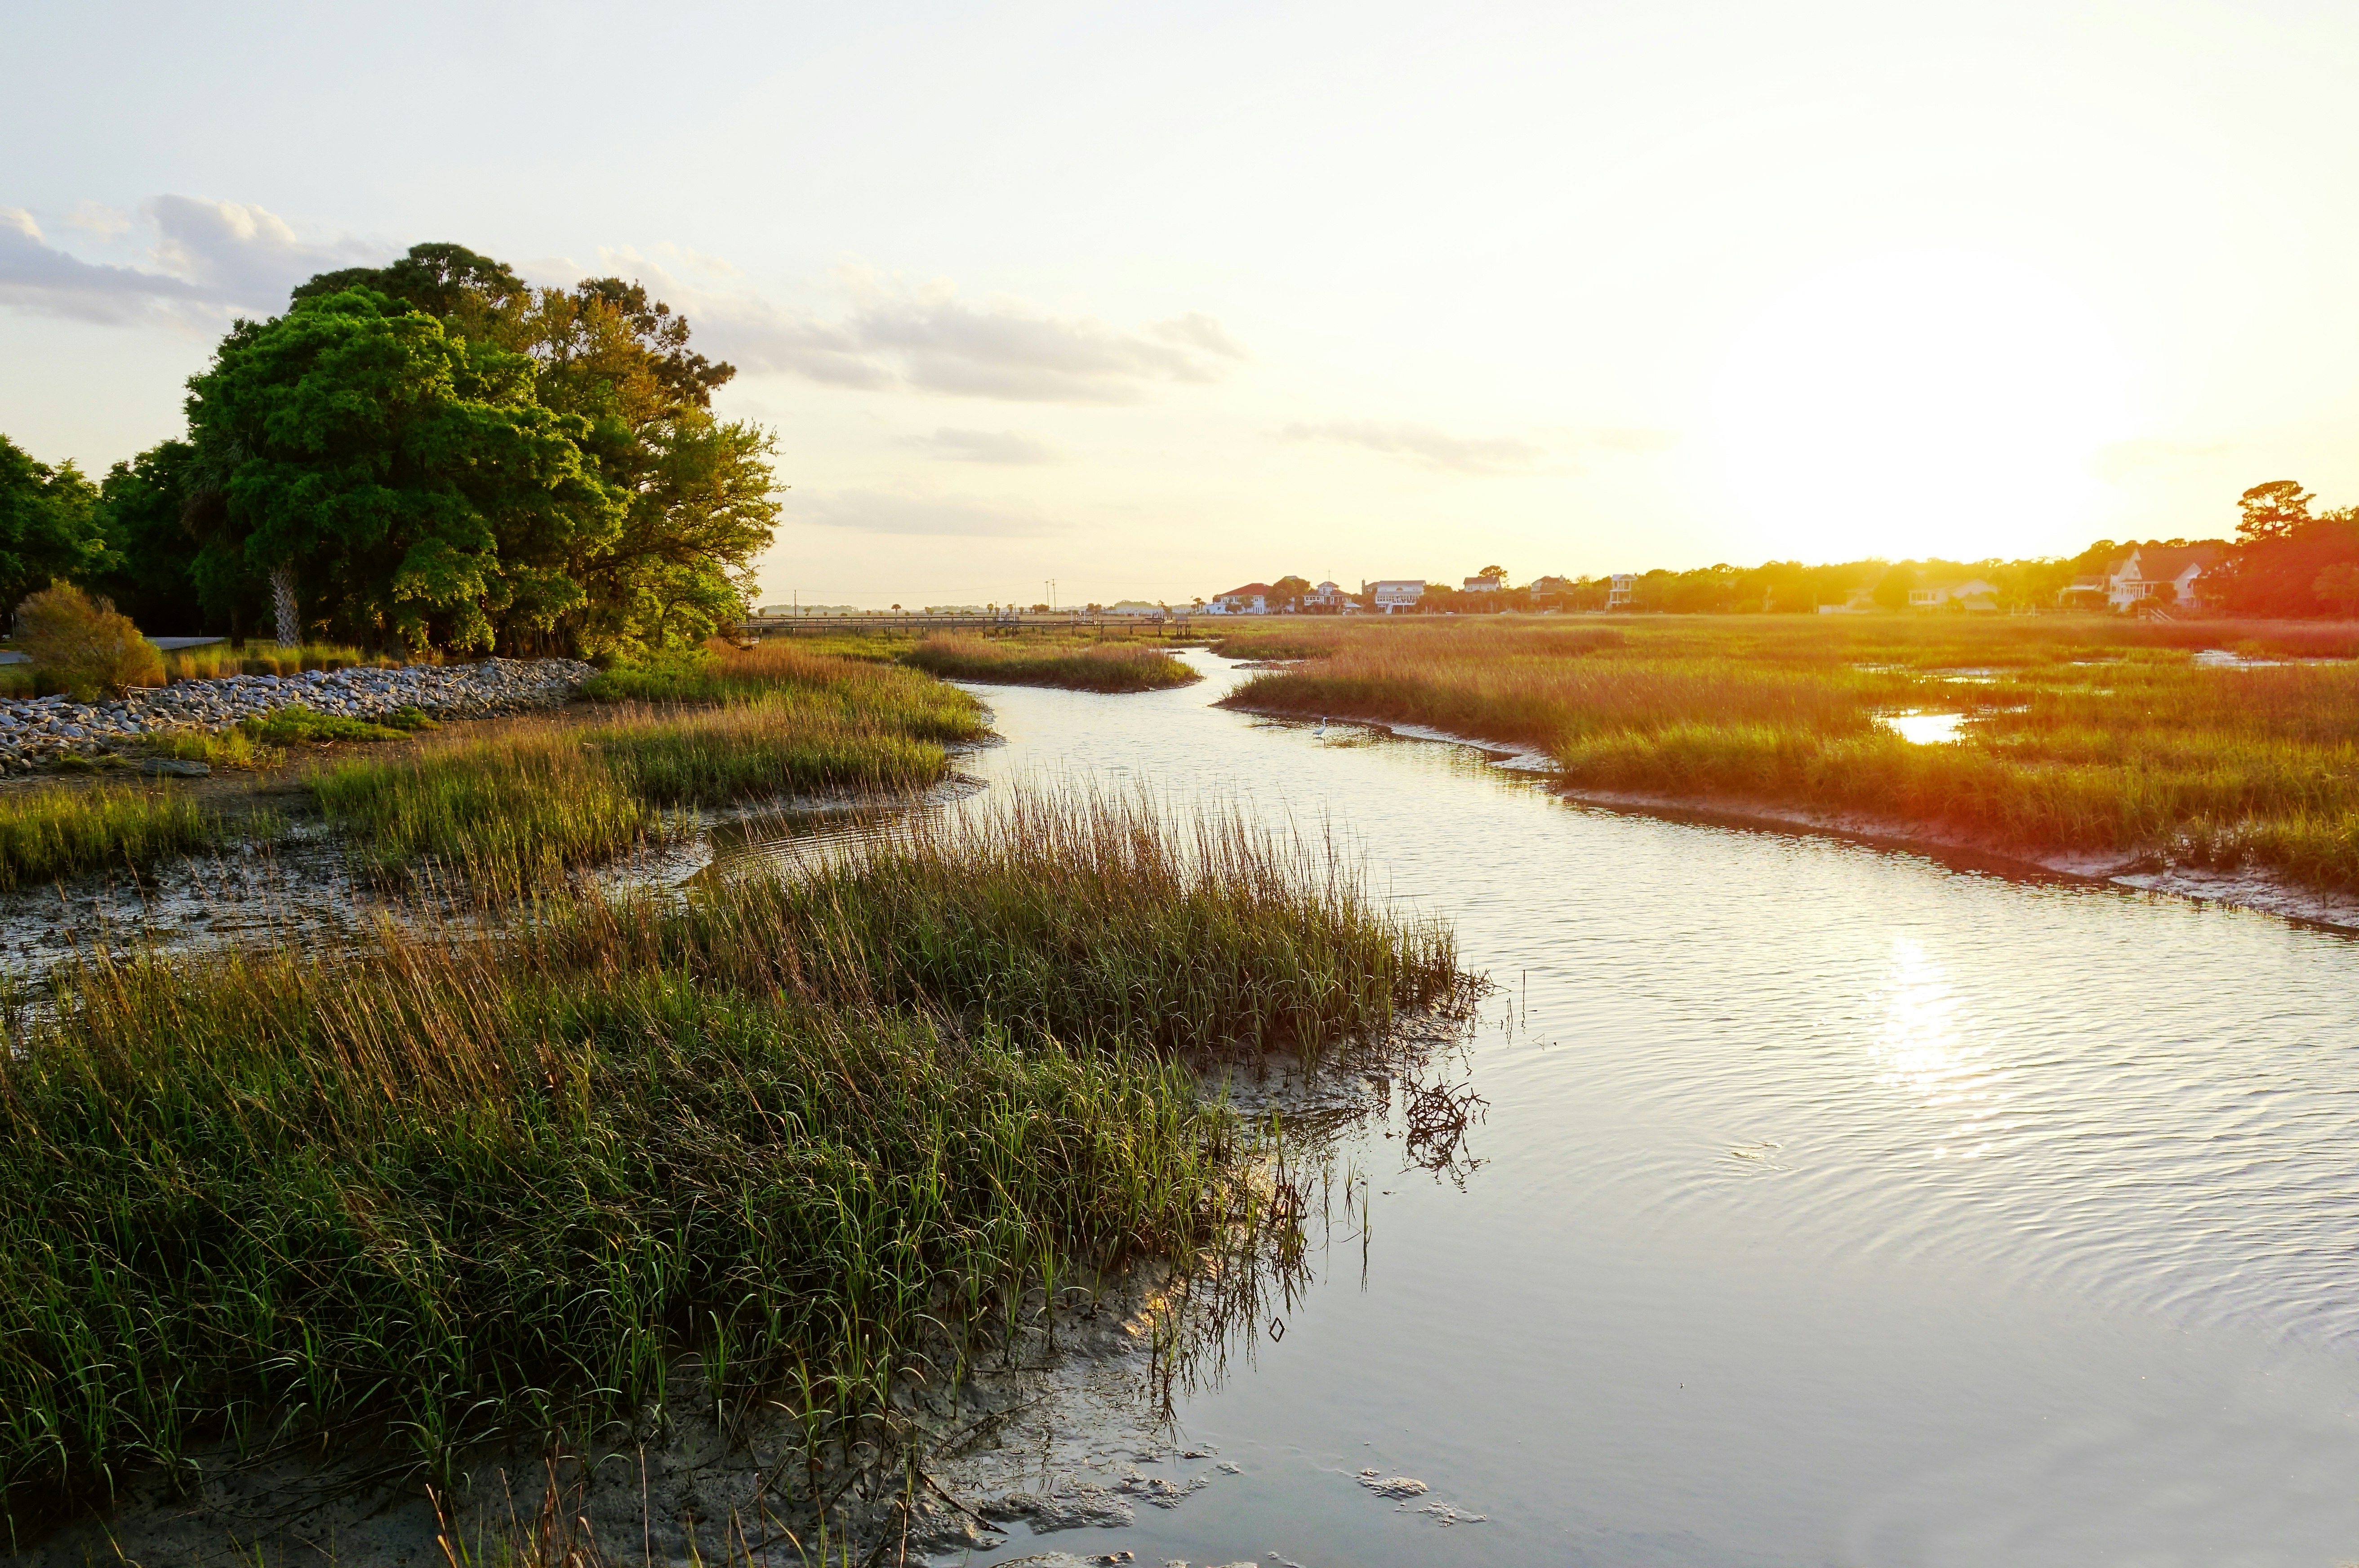 View of coastal homes along the marsh waterways in the Low Country near Charleston SC